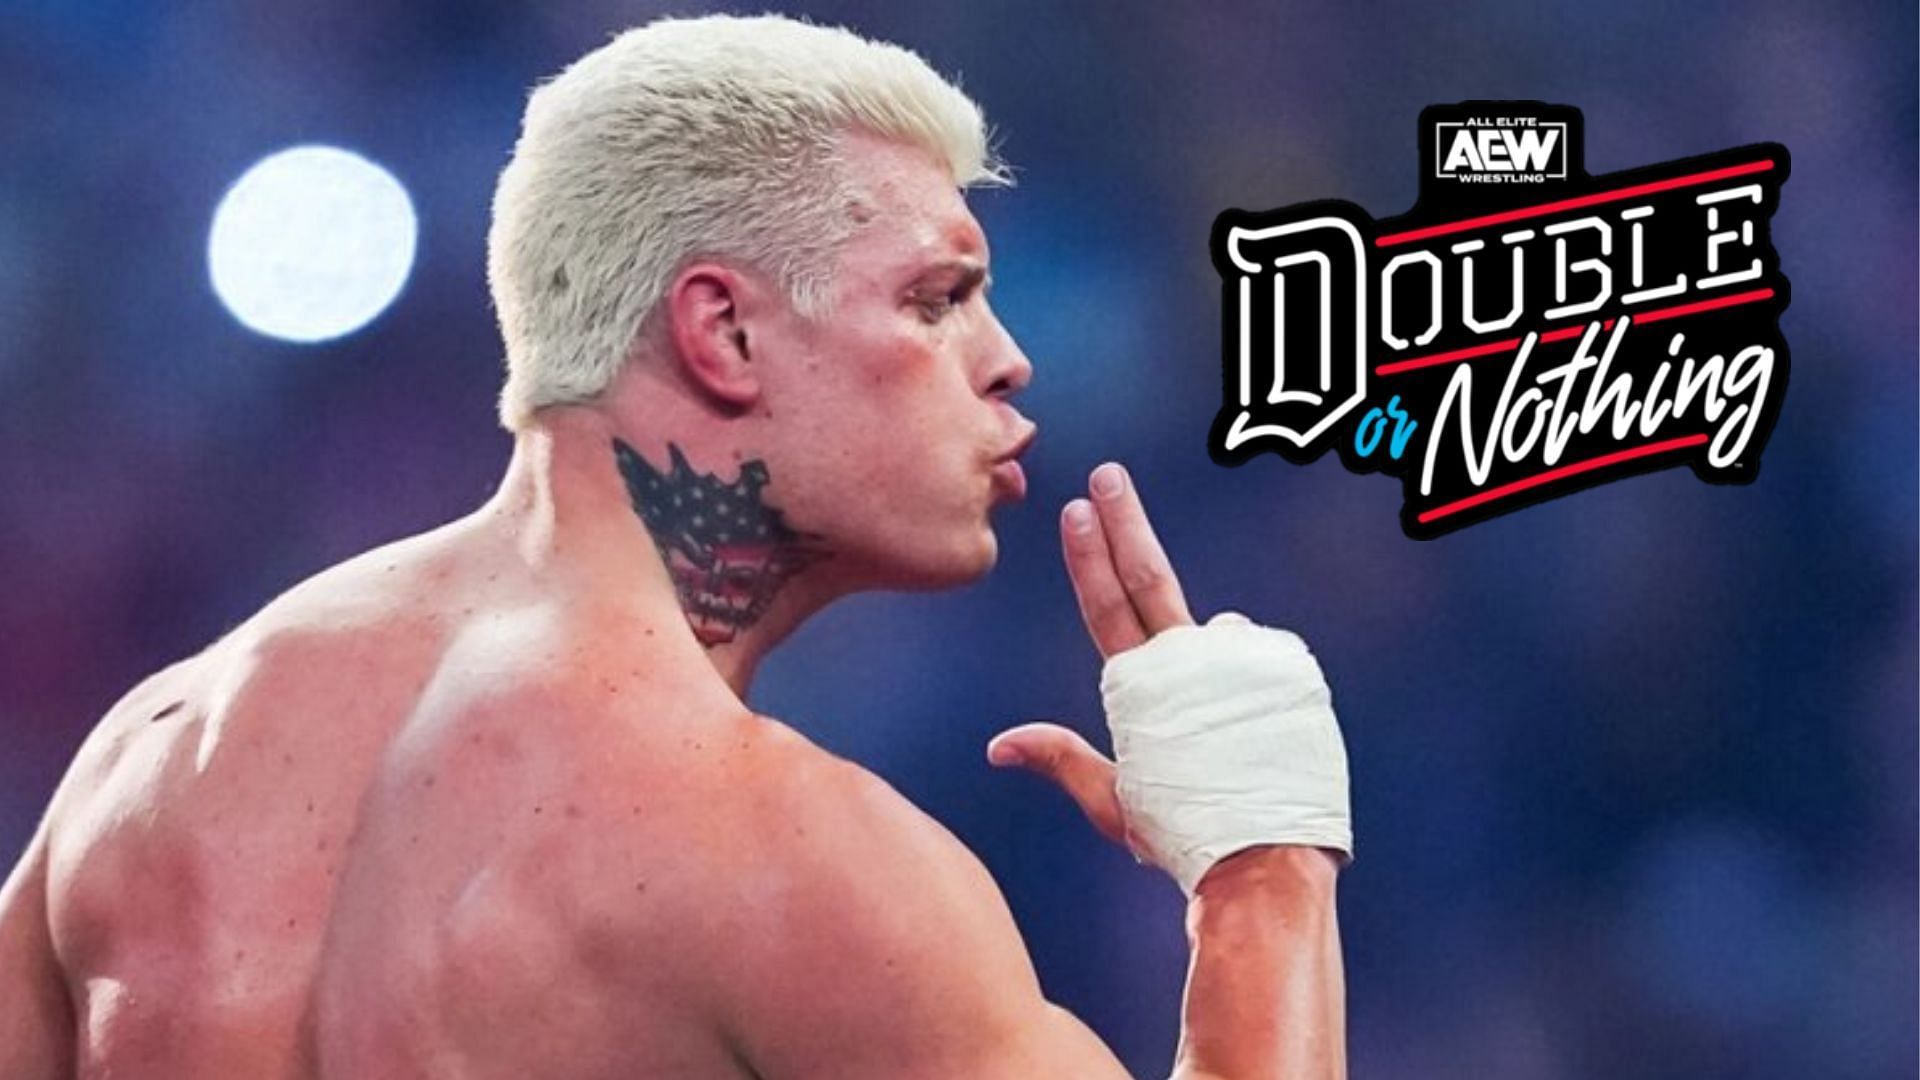 Cody Rhodes was referenced at AEW Double or Nothing 2023.